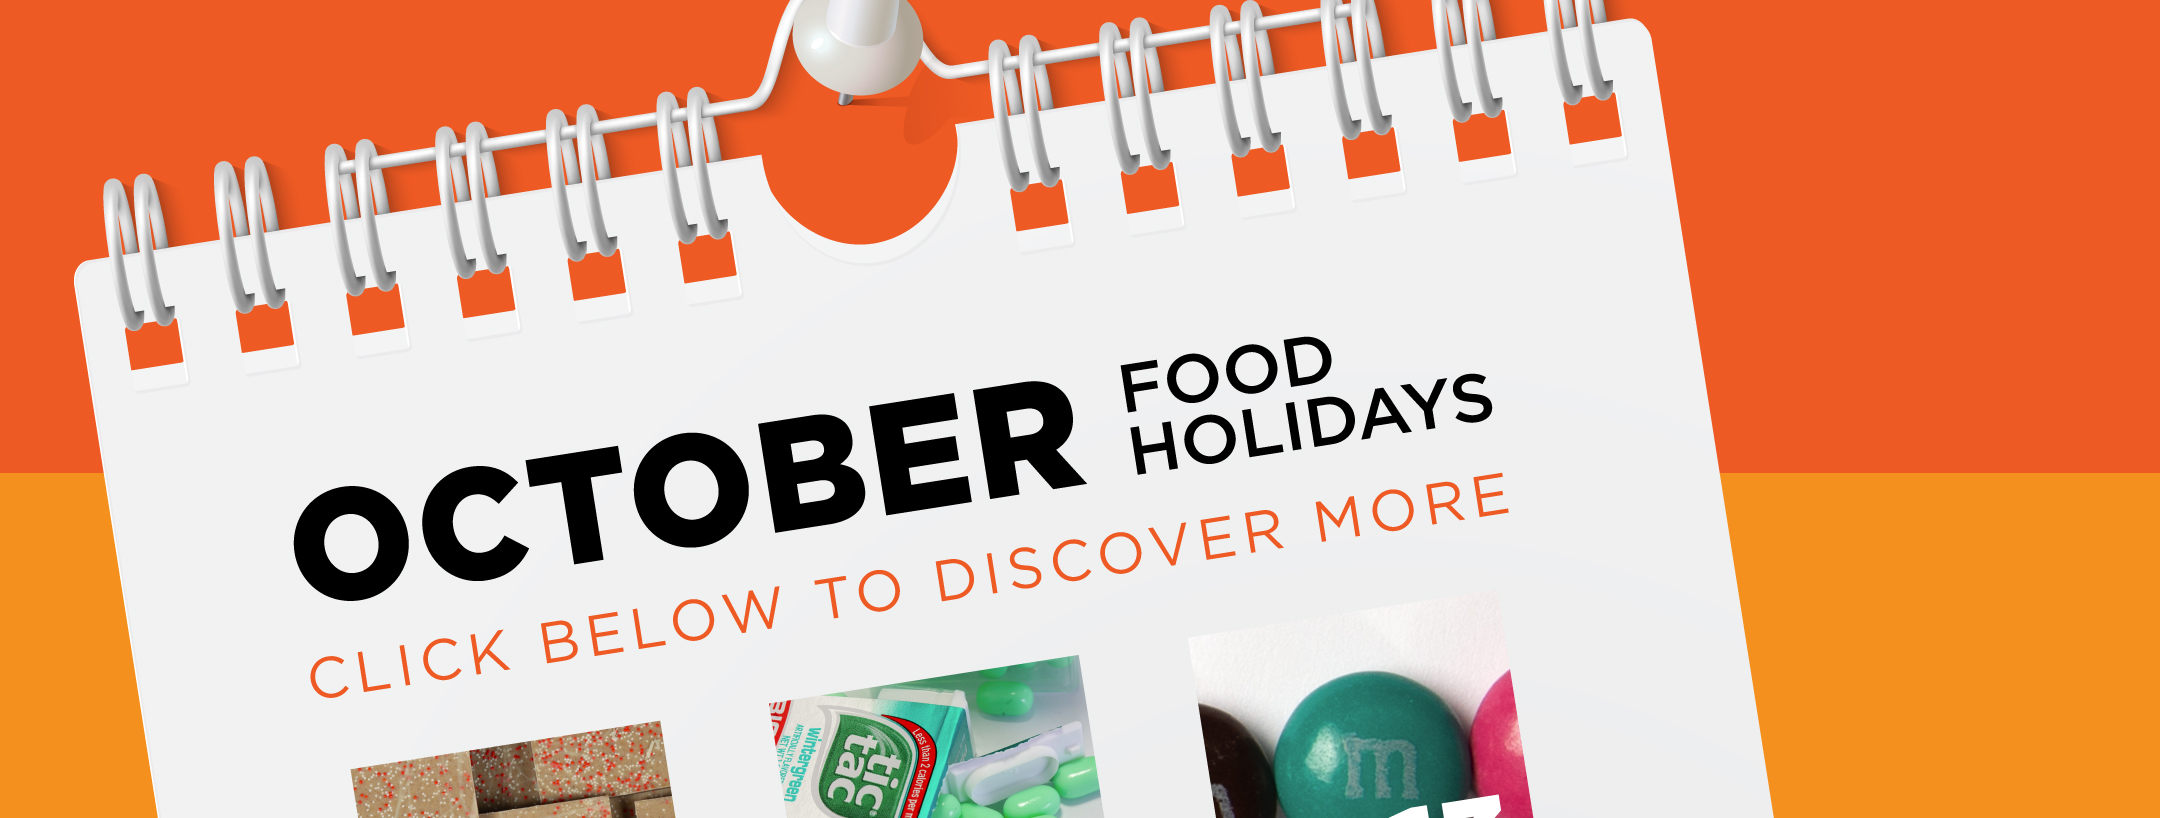 October Food Holidays We’re Falling For